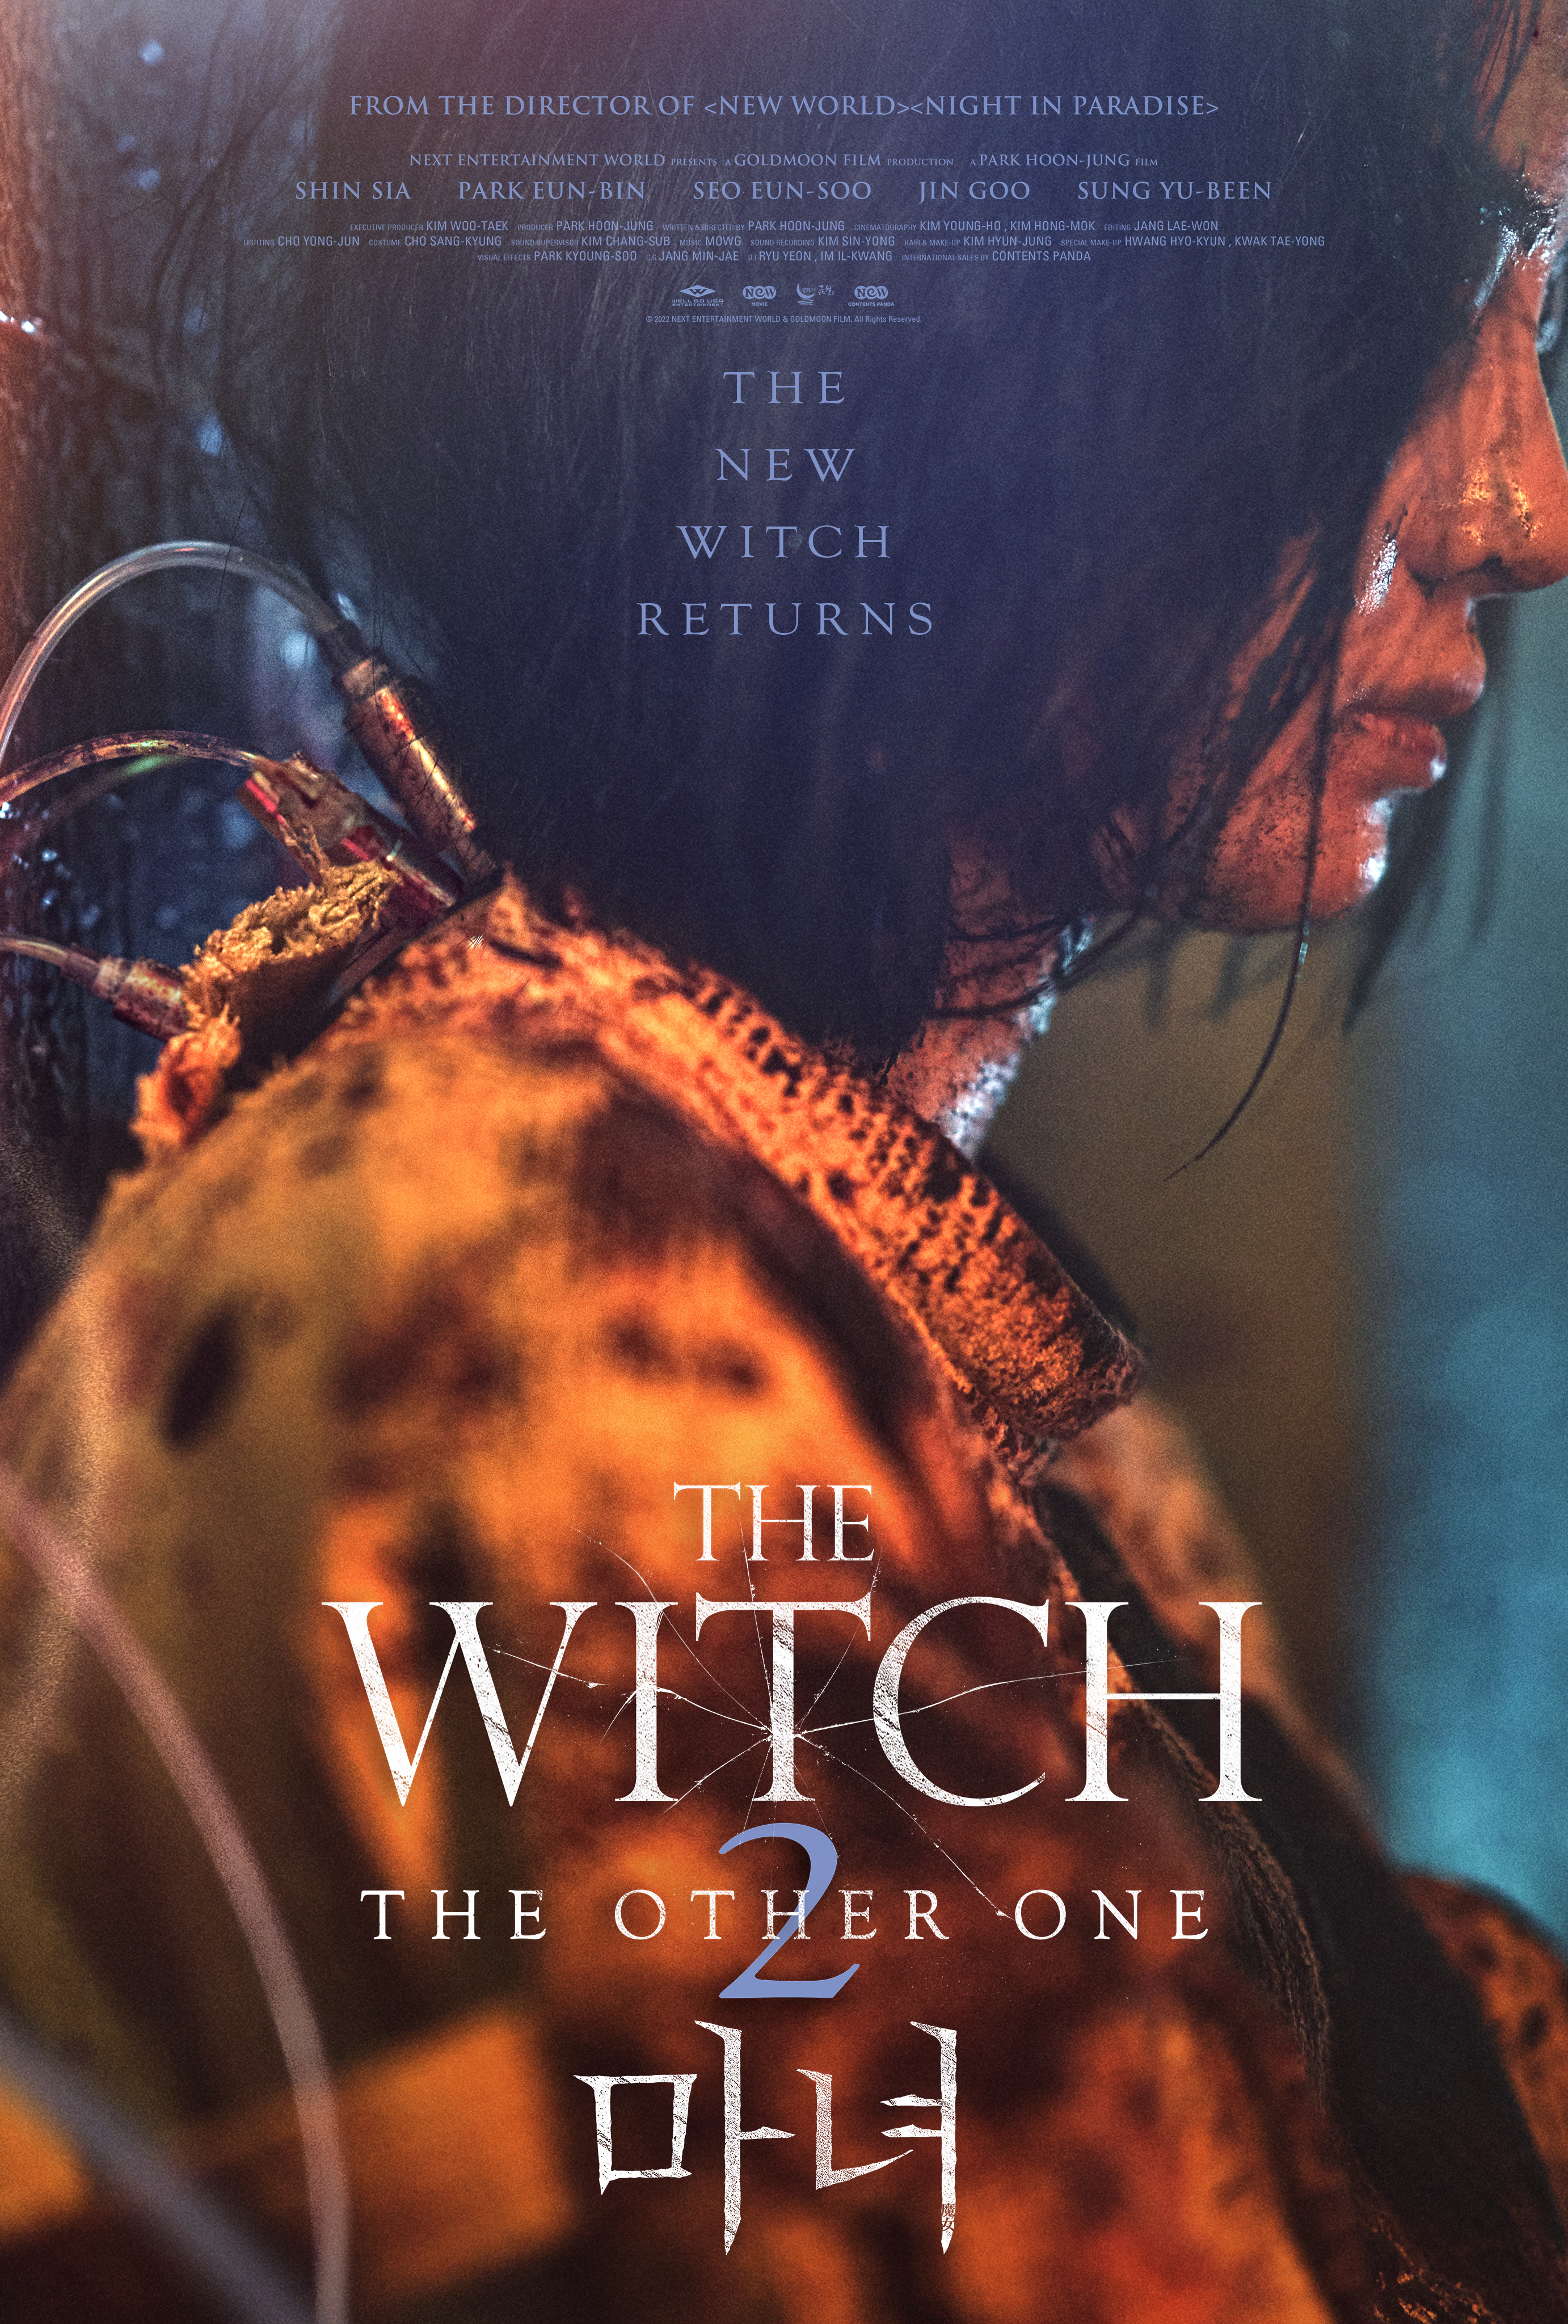 The Witch 2: The Other One packshot